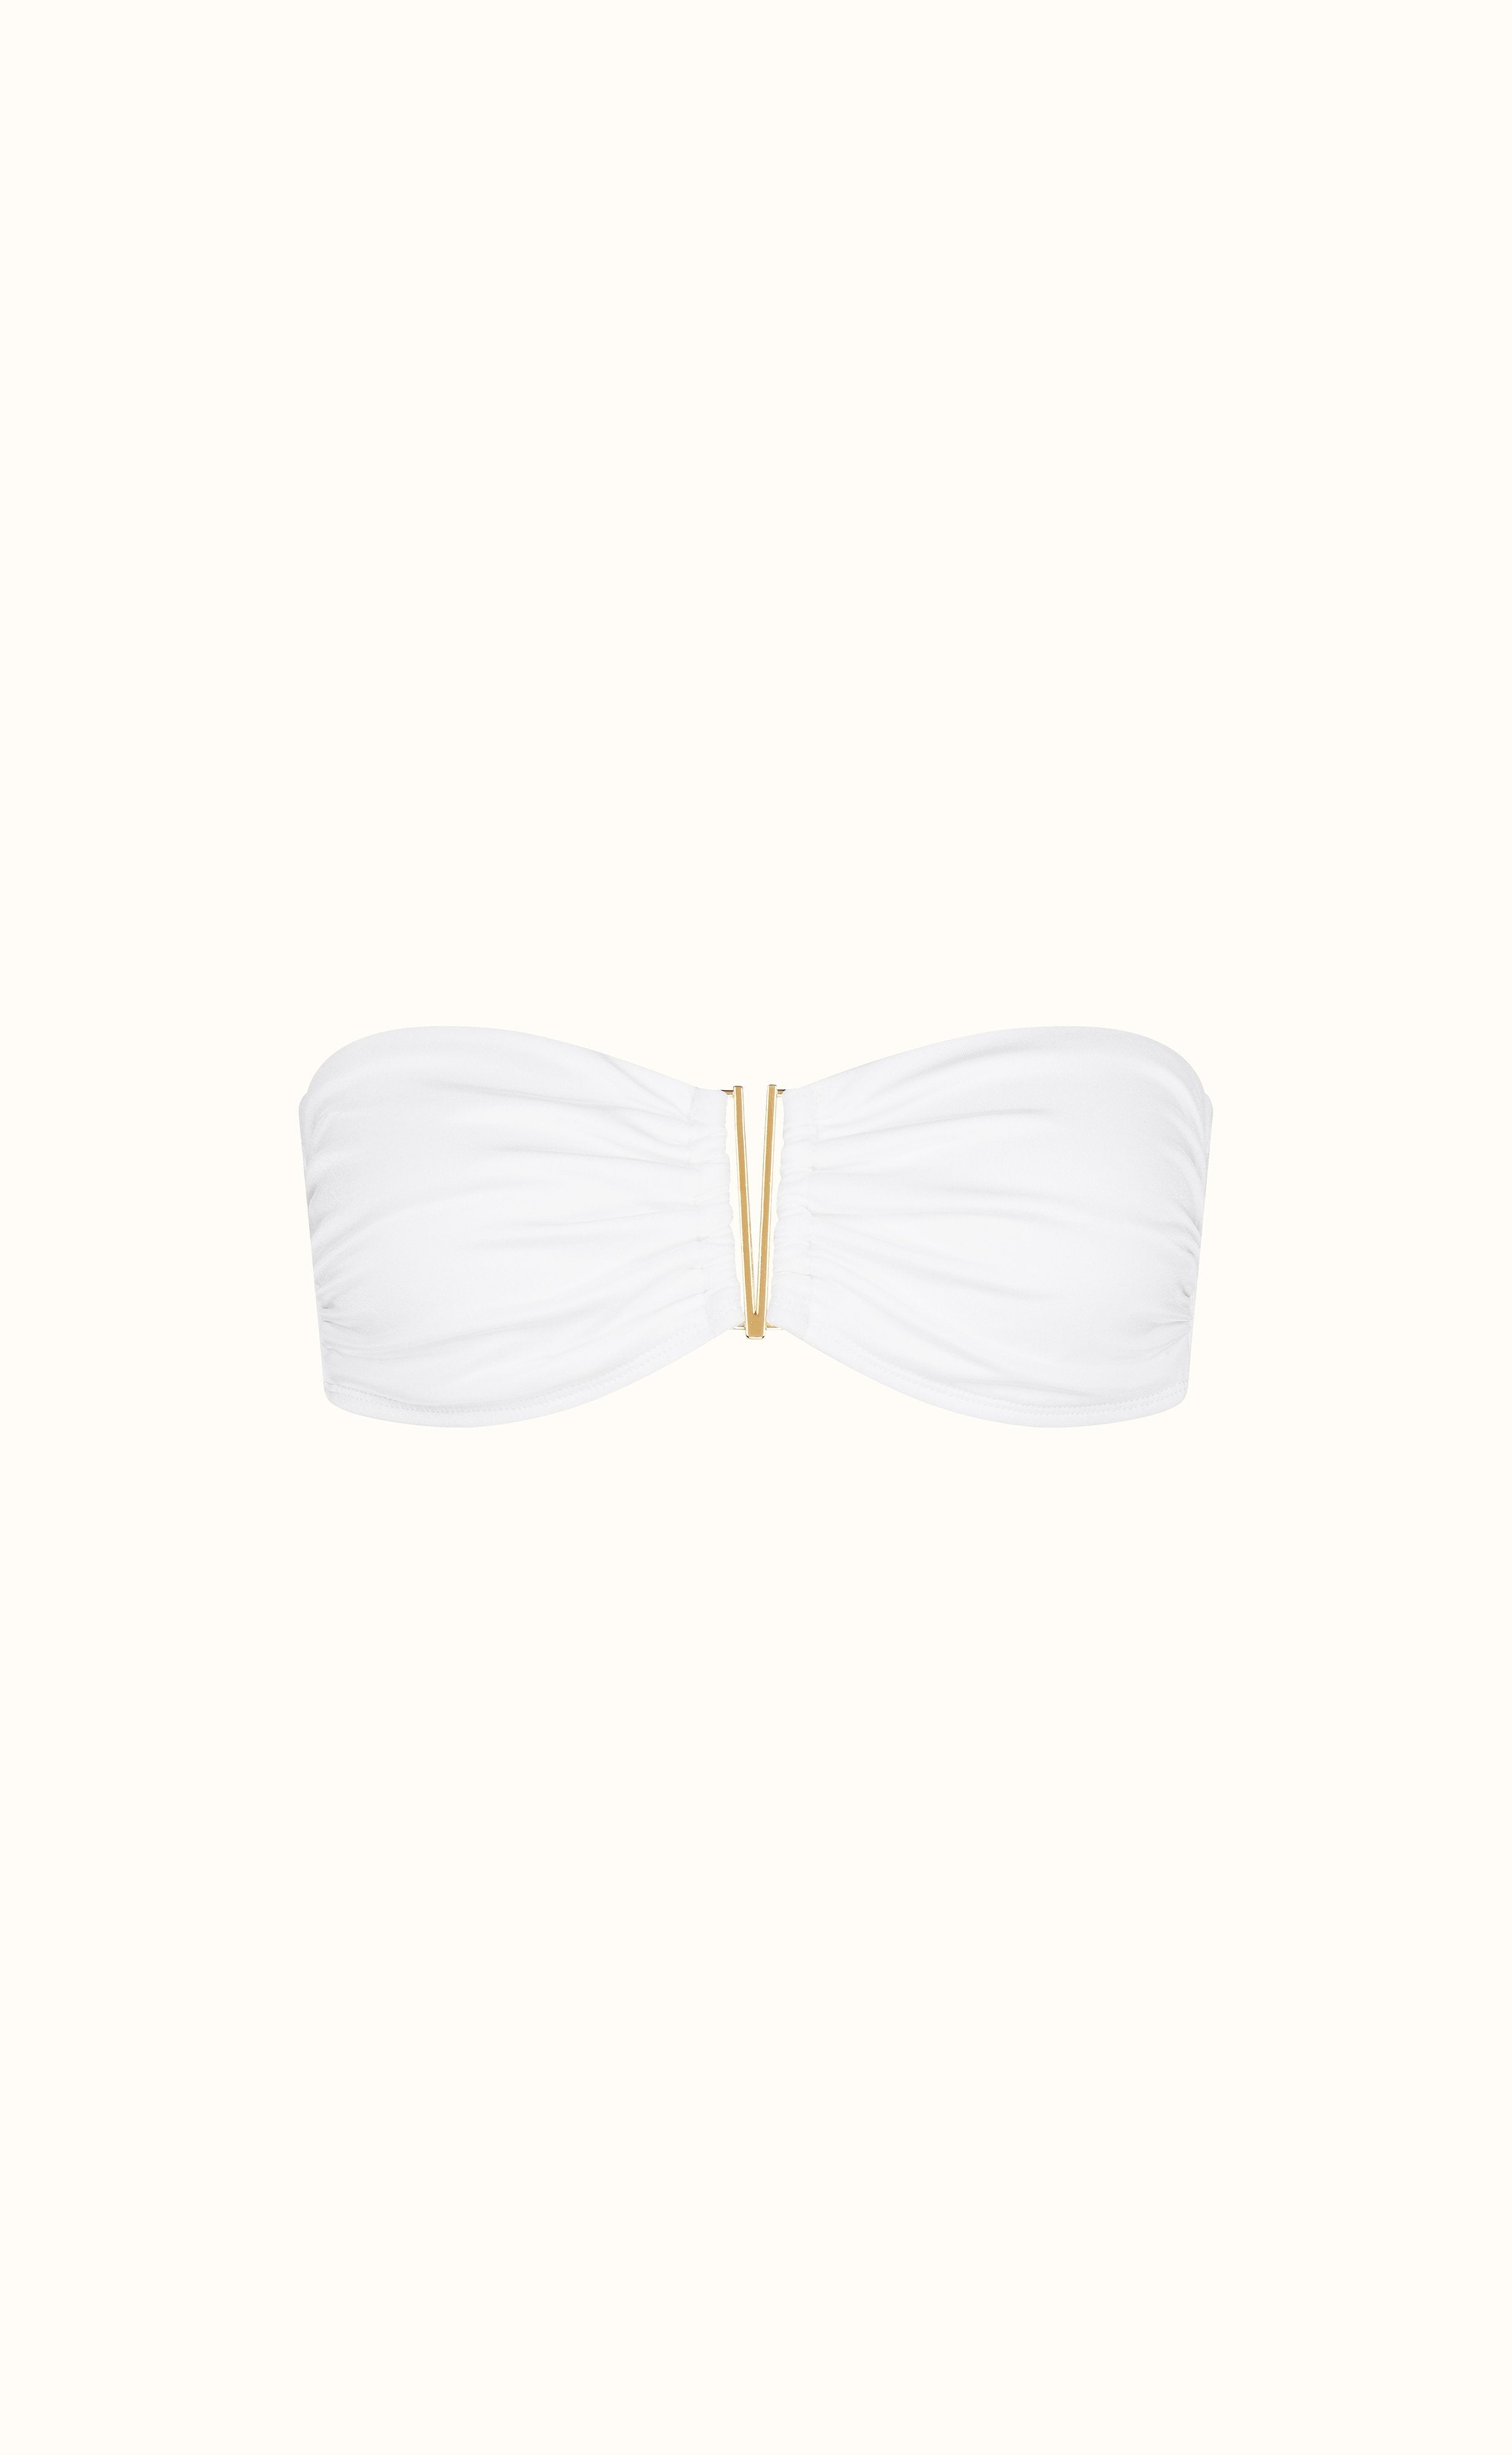 The Strapless Top